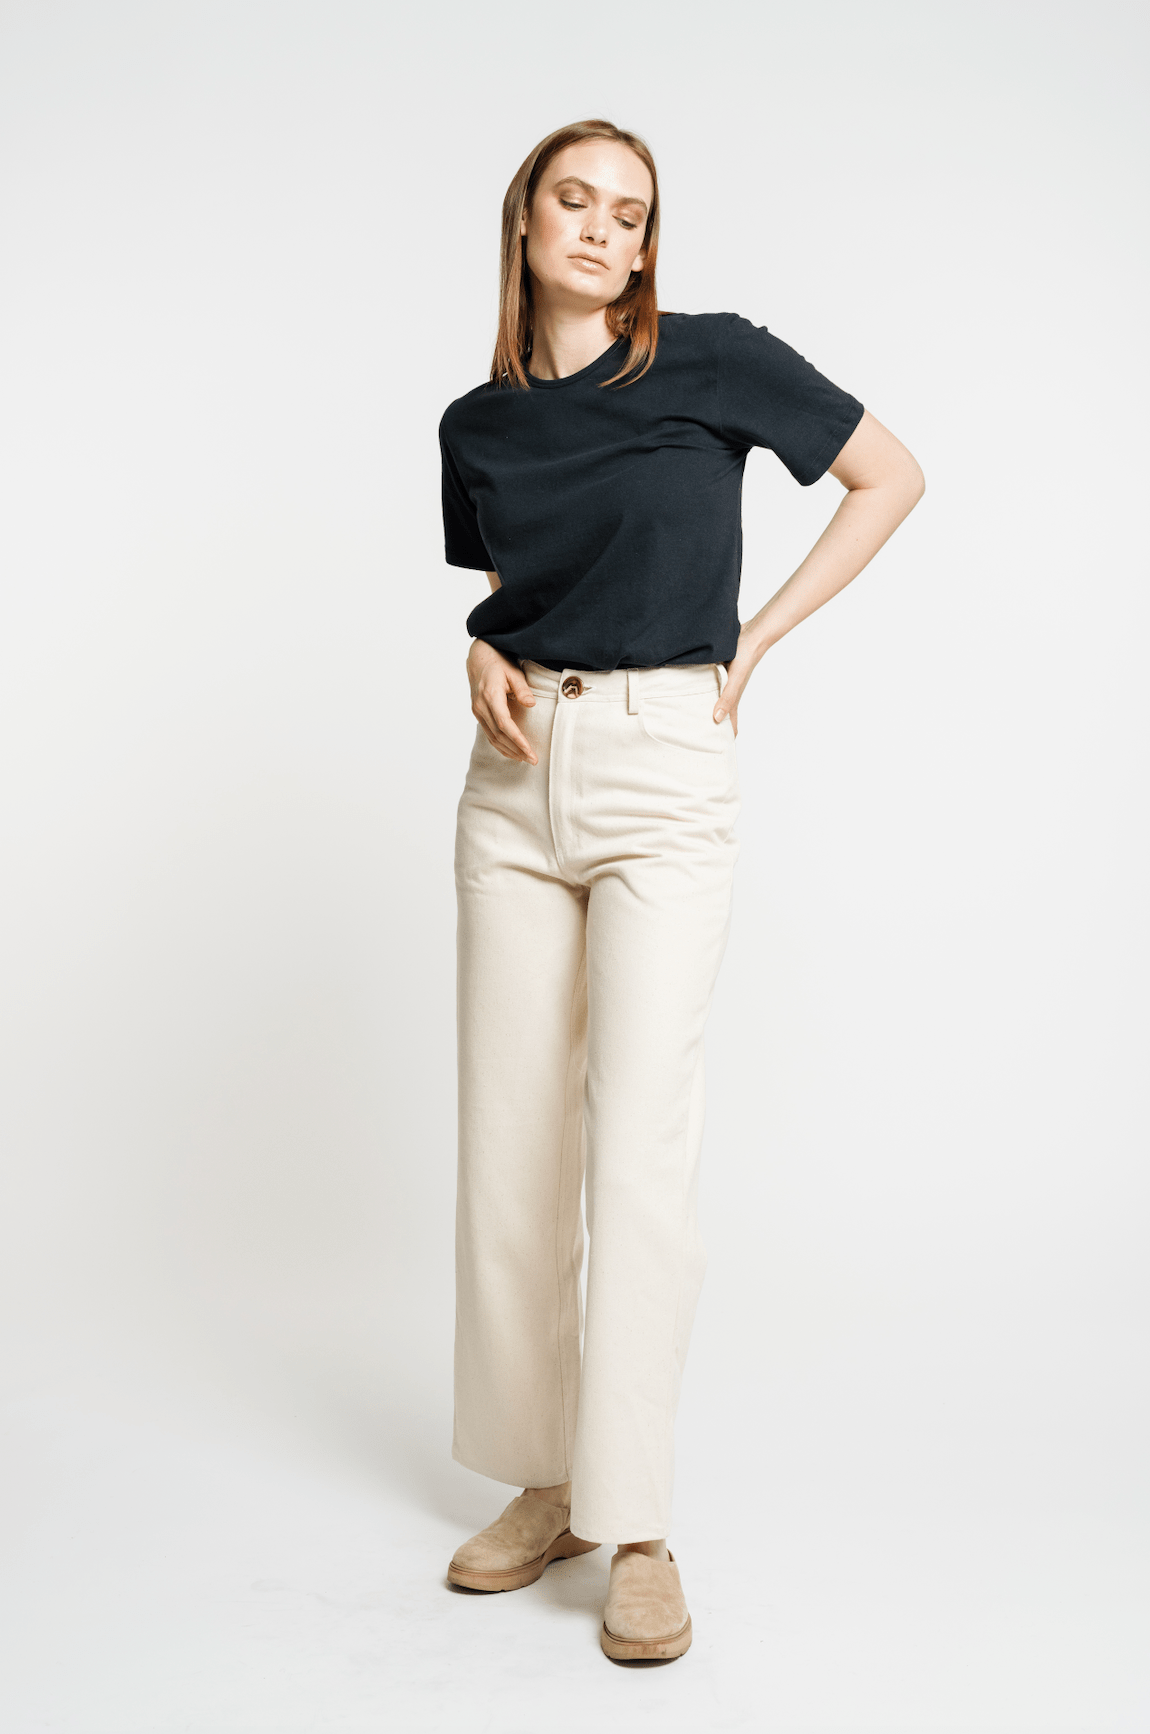 The model is wearing a sustainable black Crewneck T-Shirt and beige wide leg pants made from organic cotton.